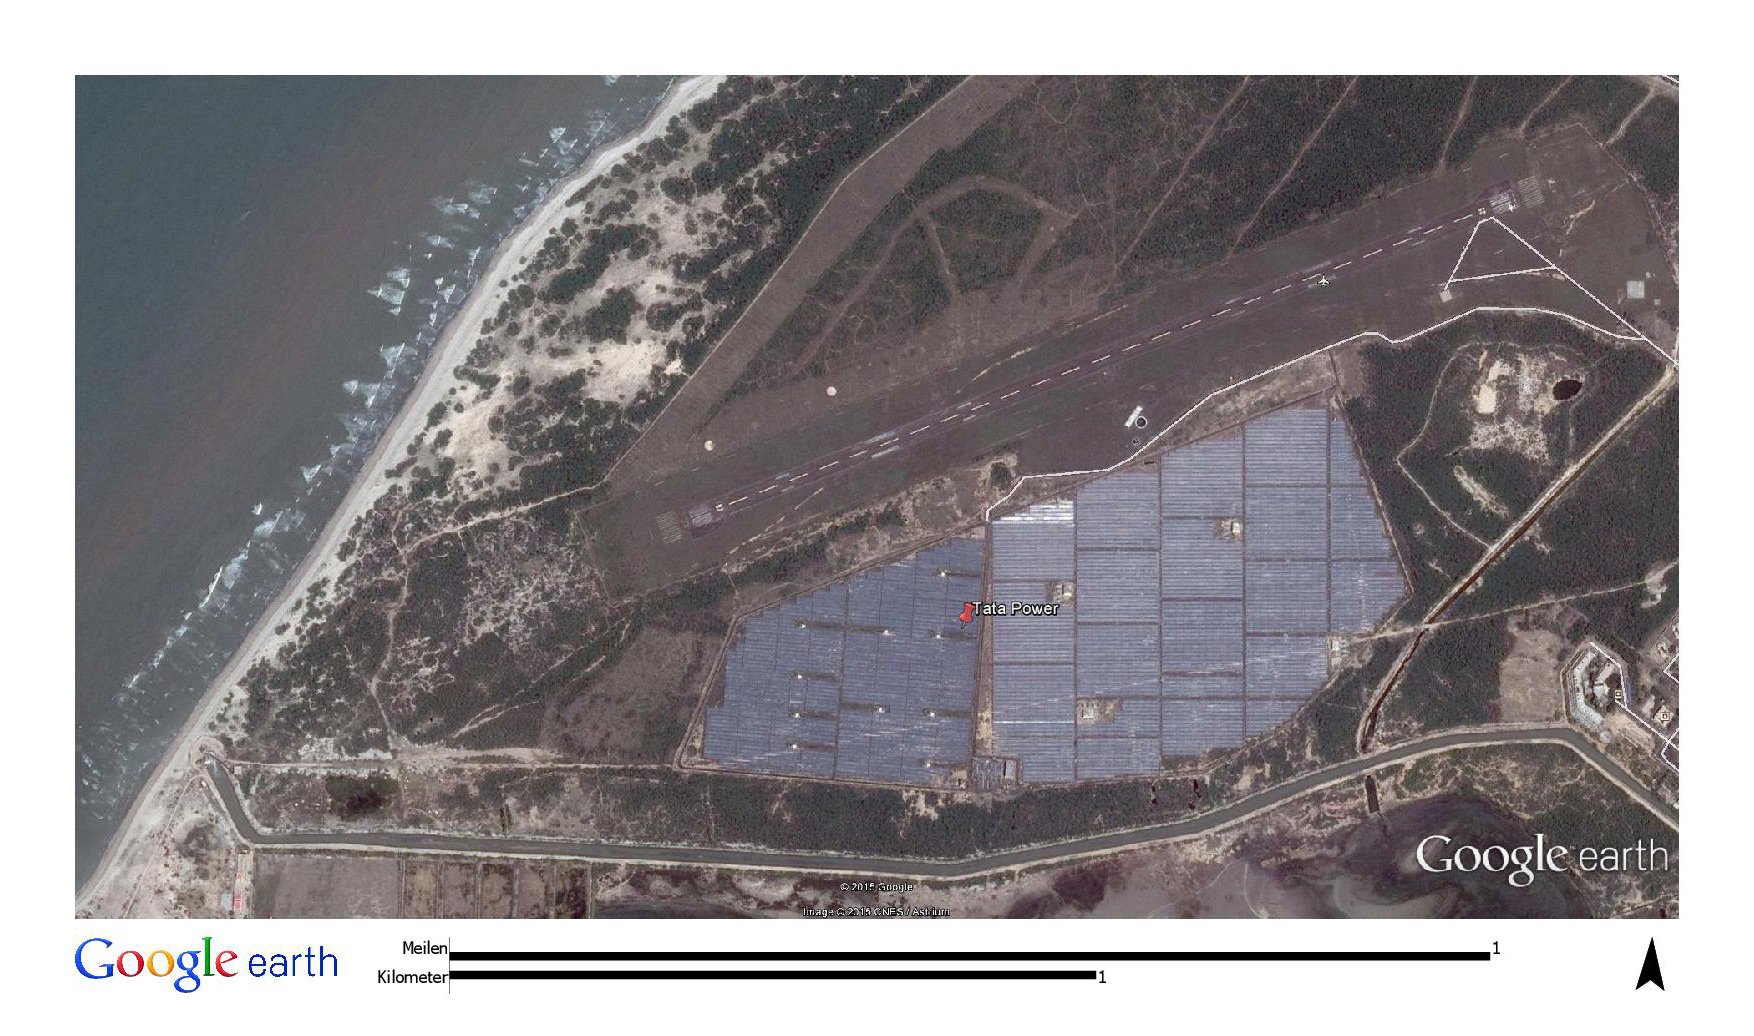 The Indian PV power plant is not only close to the sea but also right next to a chemical plant